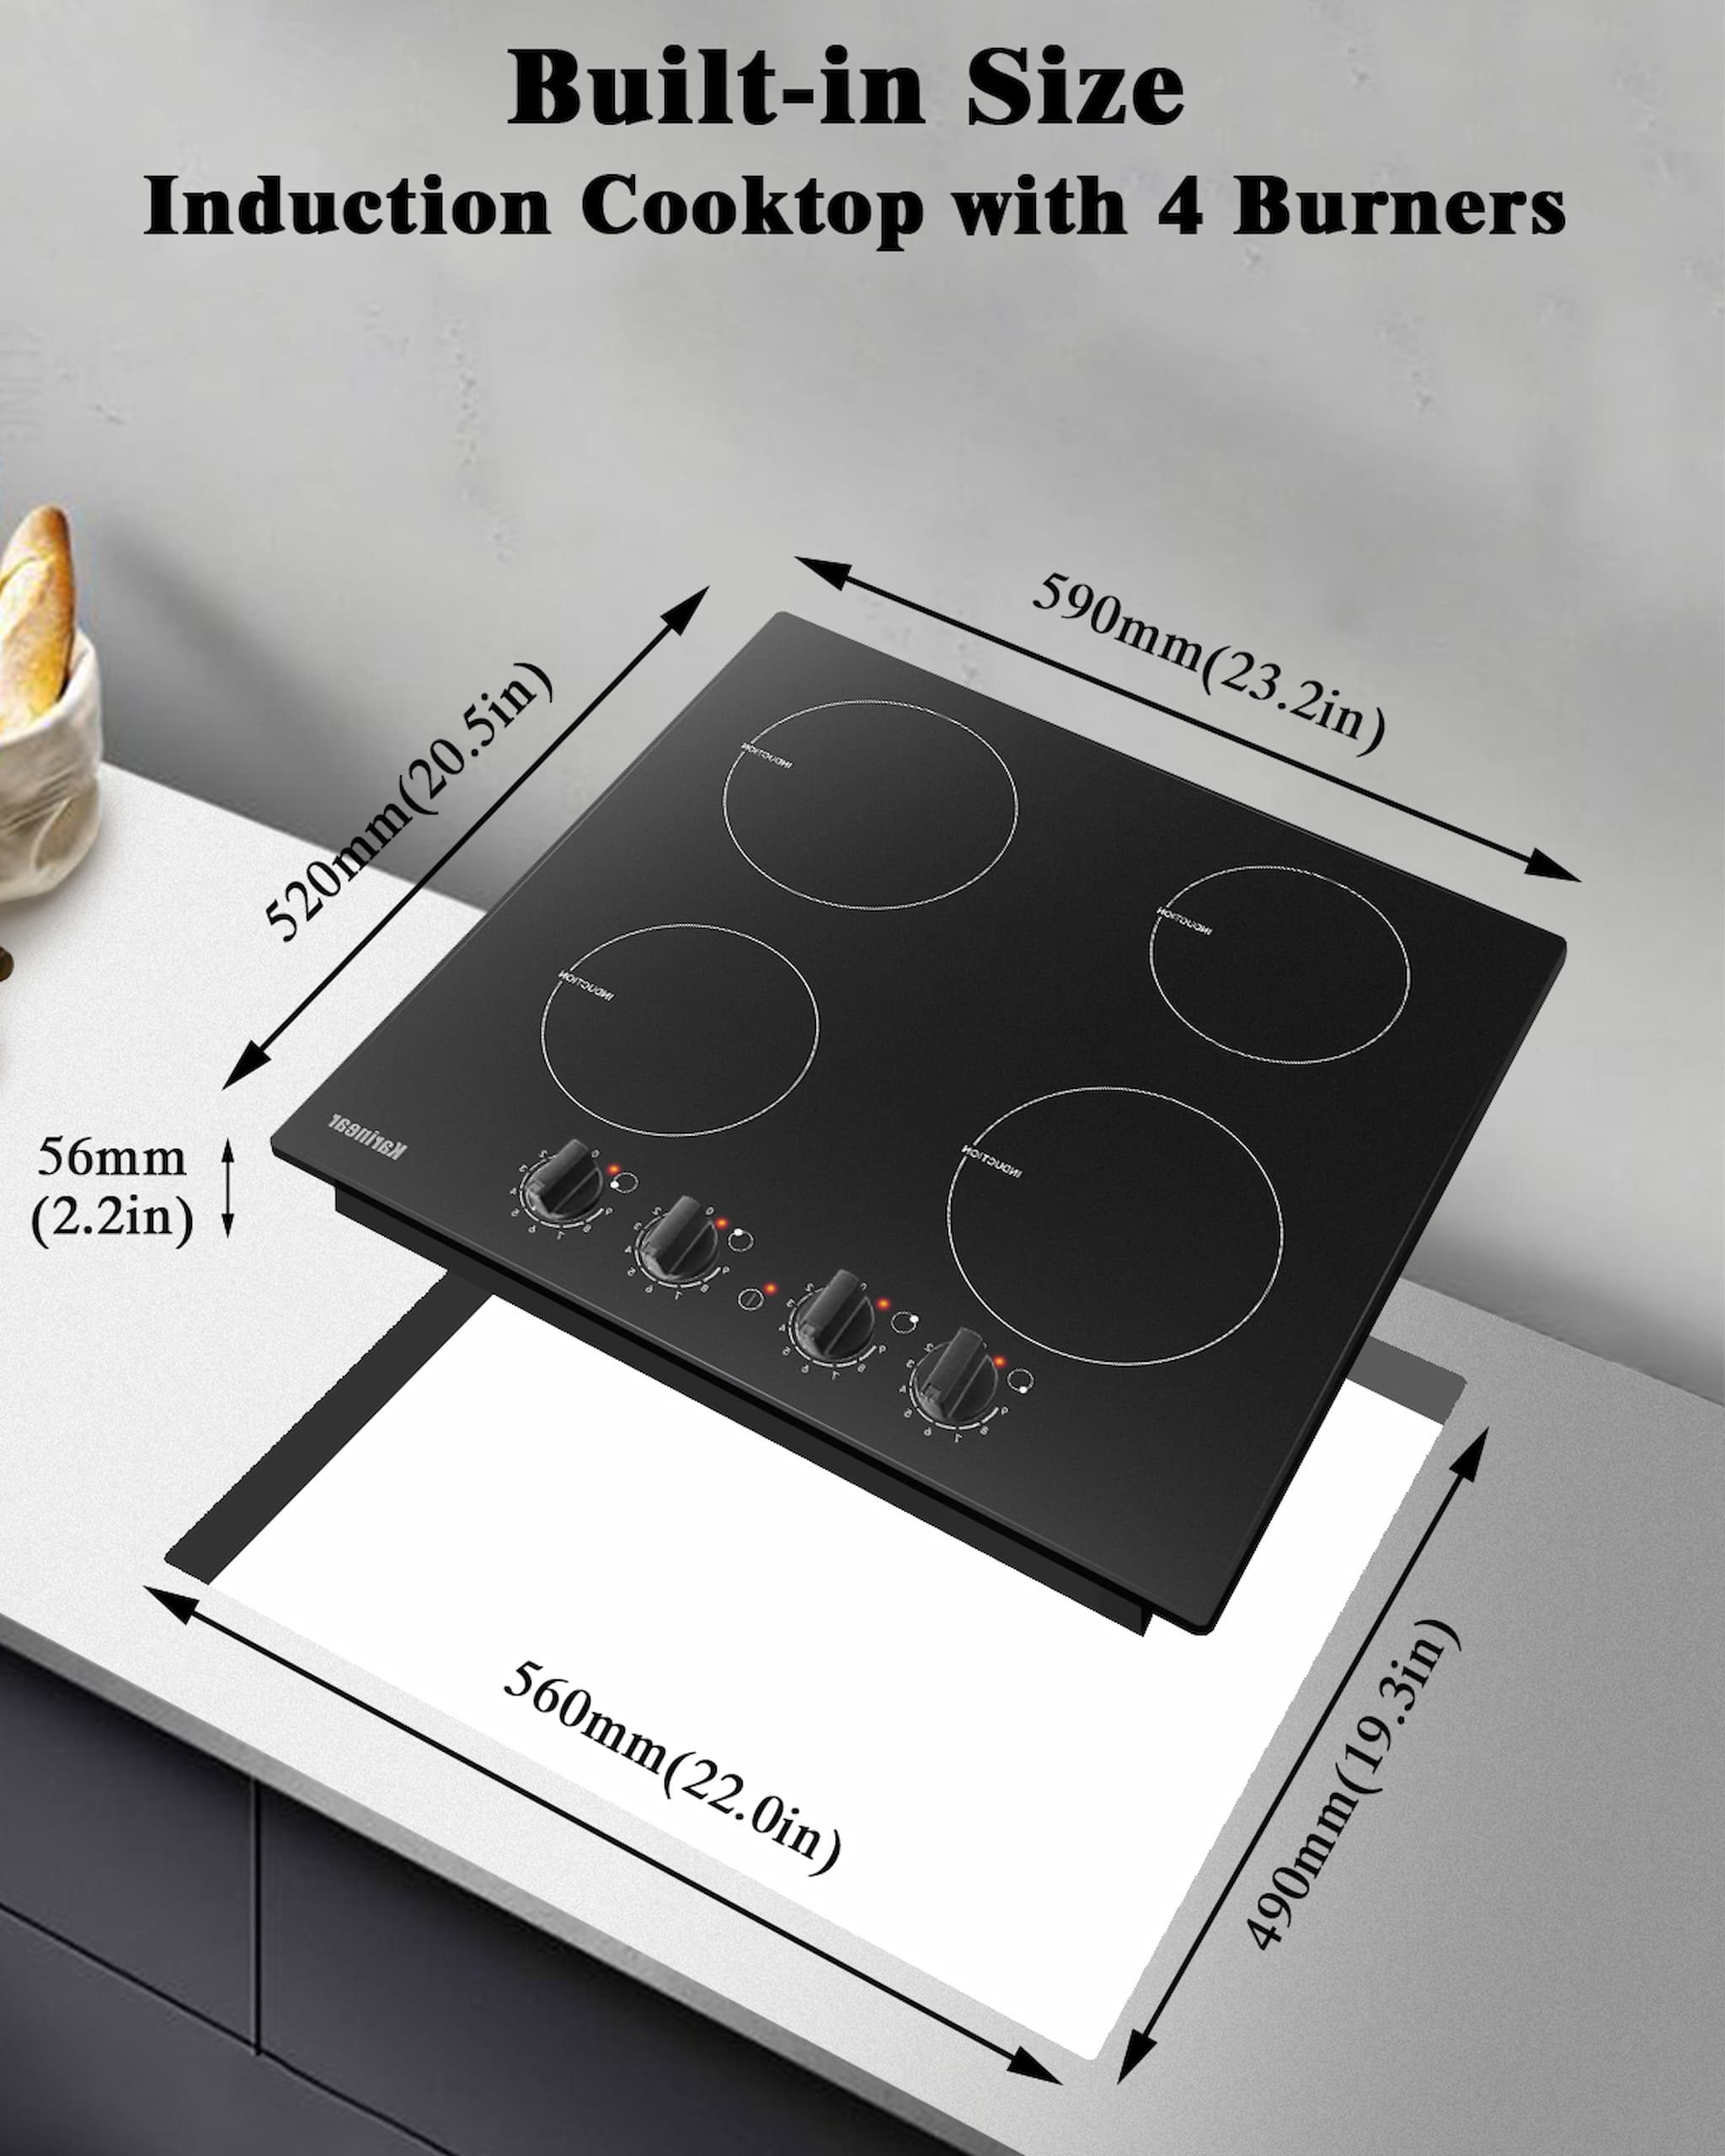 24 Inch 4 Burner Built-in Induction Cooktop-Electronic Knob Control